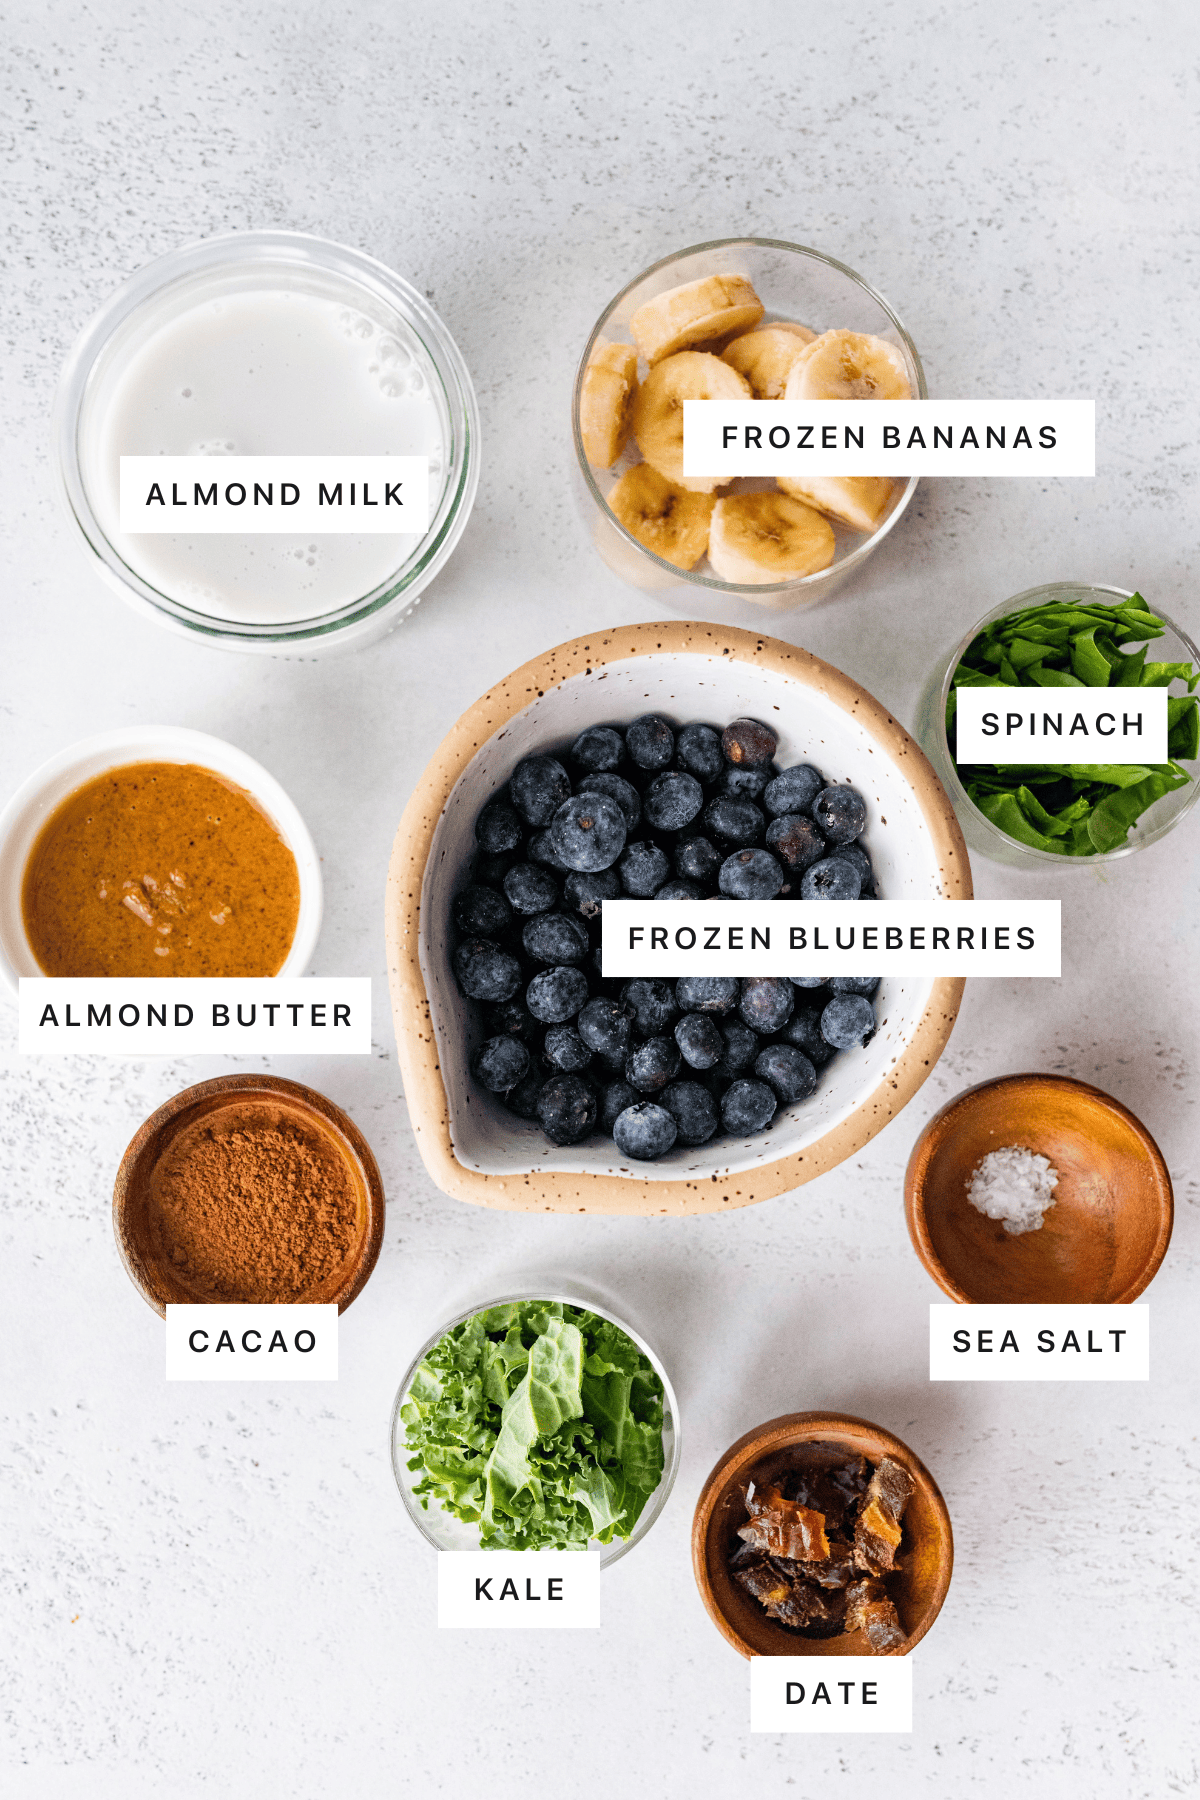 Ingredients for the chocolate blueberry smoothie: frozen bananas, frozen blueberries, almond milk, almond butter, cacao powder, kale, spinach, date and sea salt.